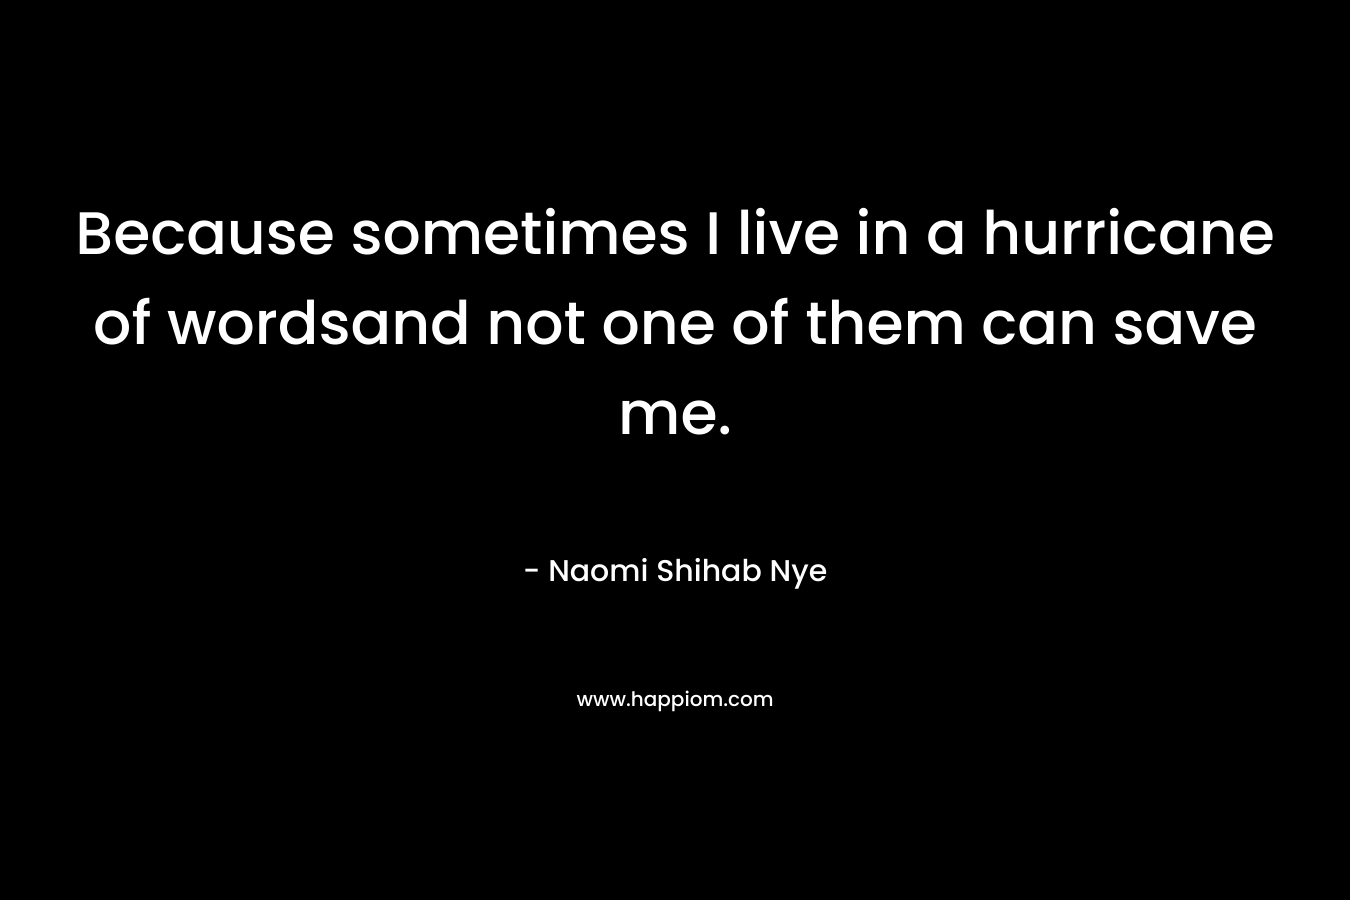 Because sometimes I live in a hurricane of wordsand not one of them can save me. – Naomi Shihab Nye